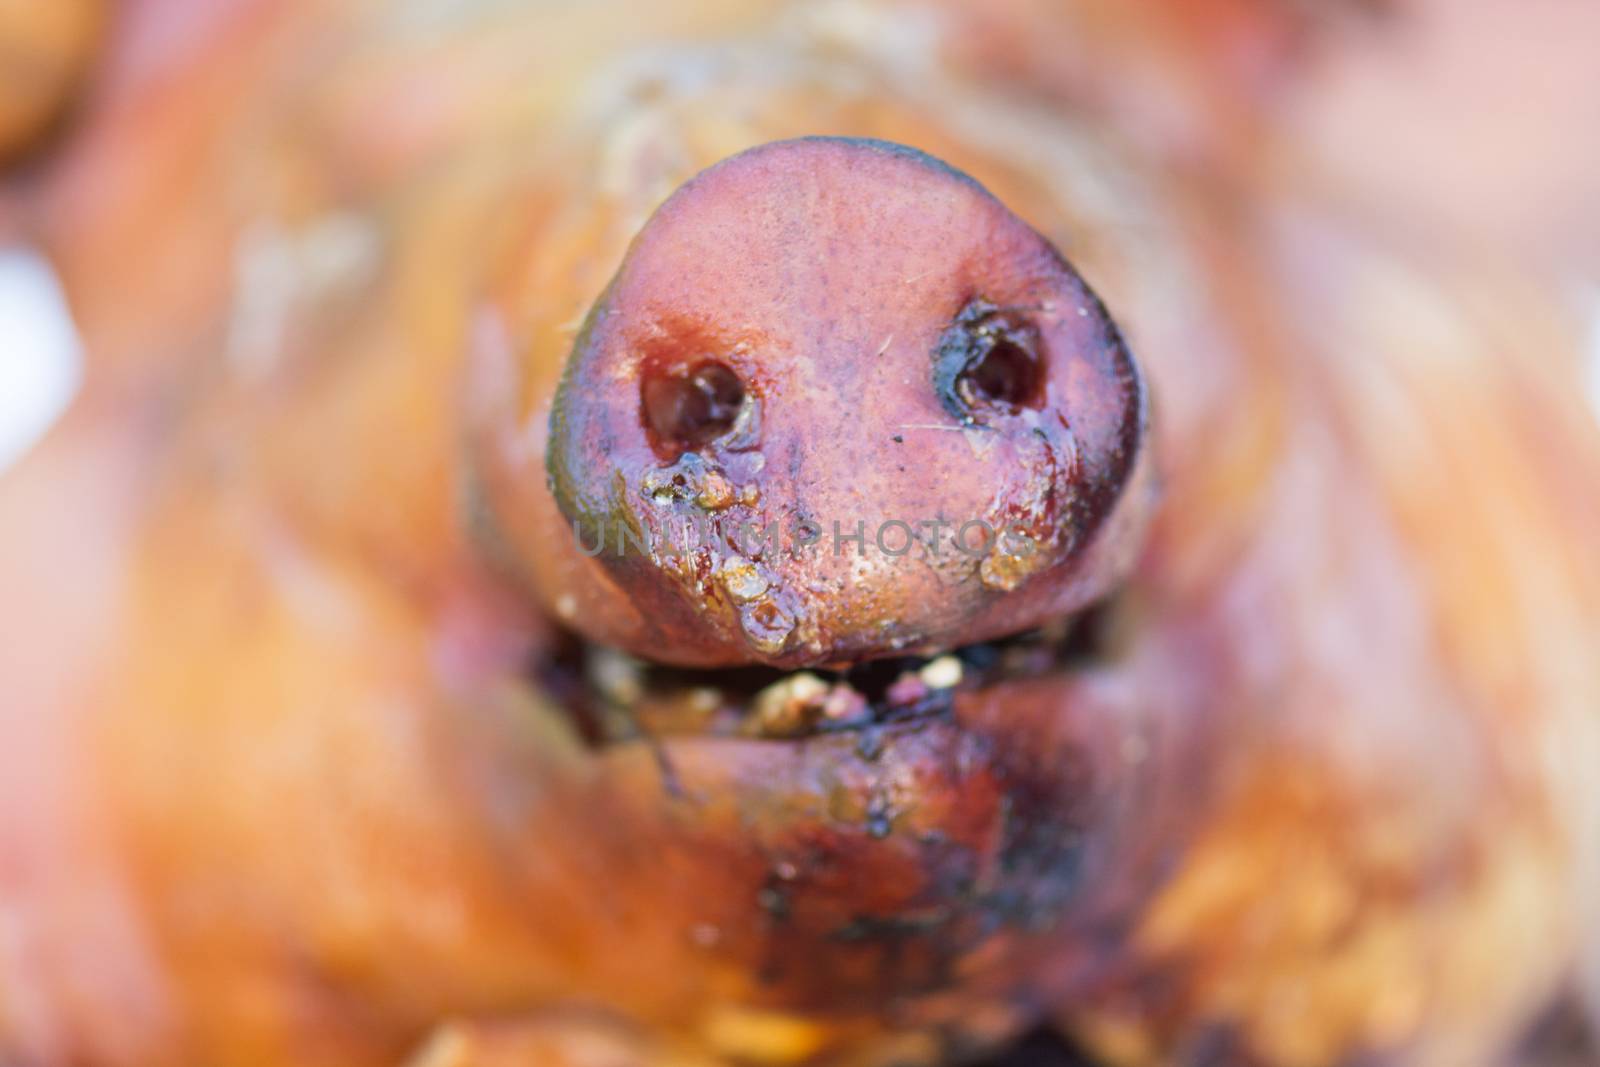 Detail of the nose of a suckling pig by Arrxxx